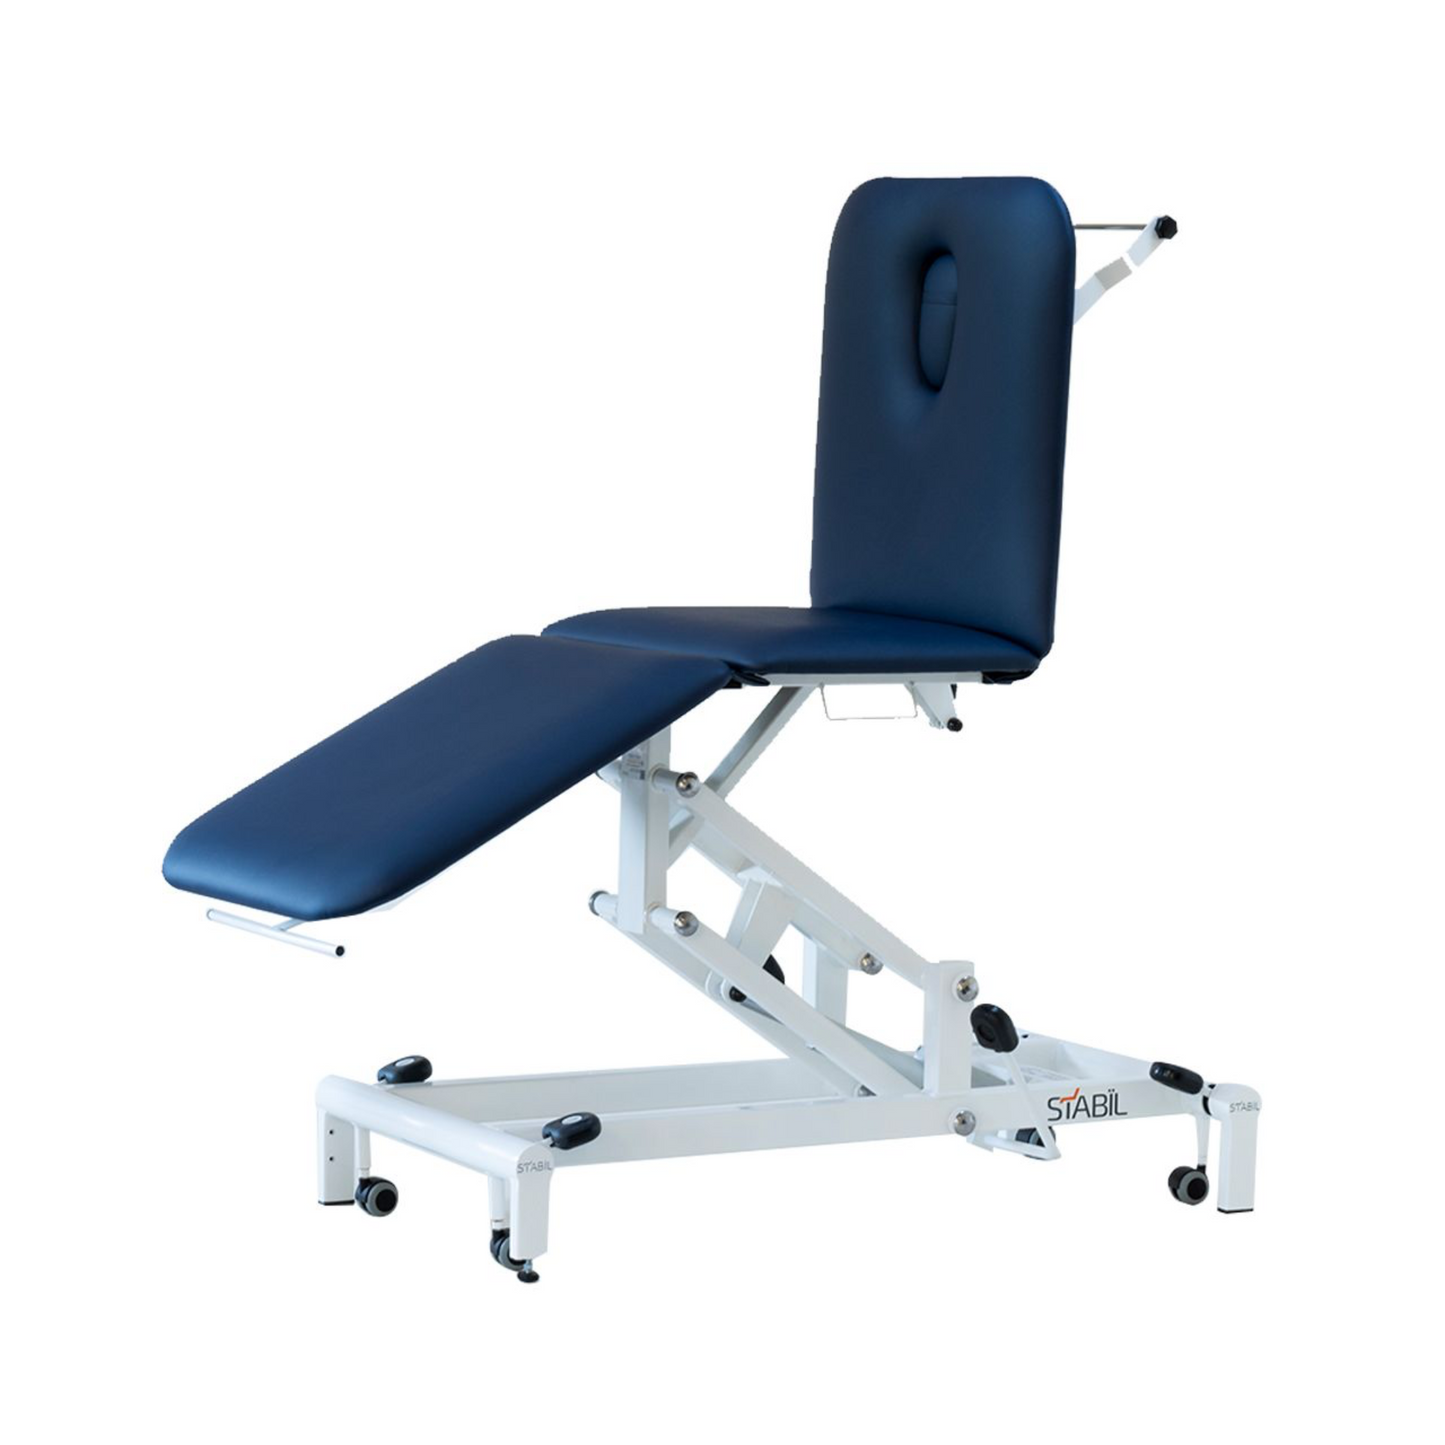 Stabil Komfort 3-Section Treatment Table